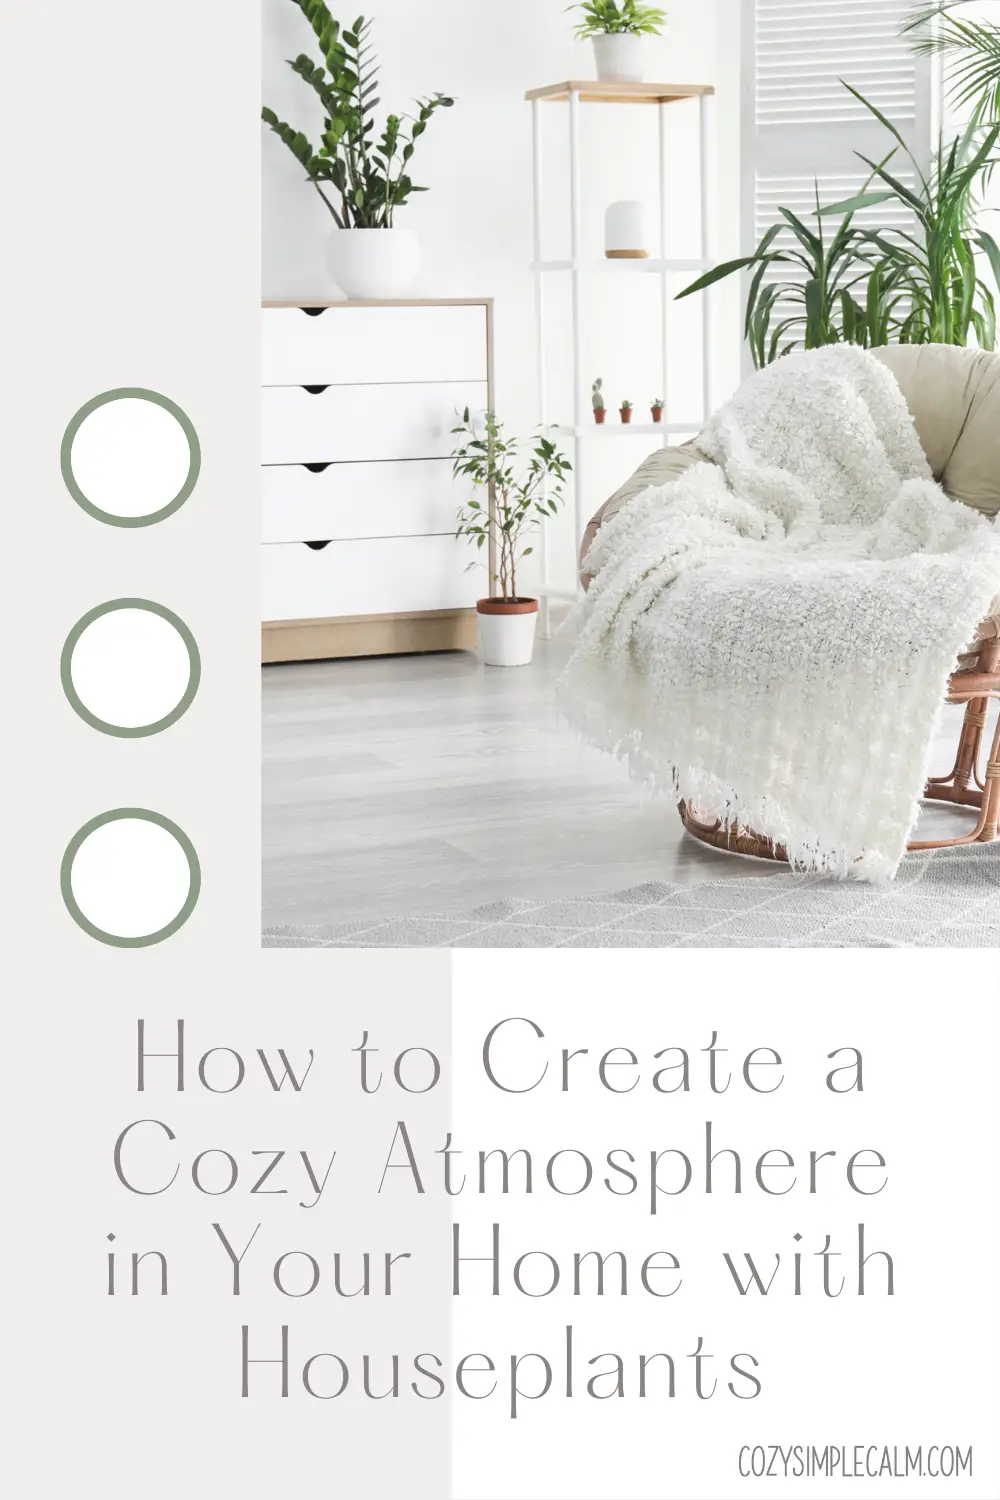 Image of papsan chair in room with various houseplants - Text overlay: How to create a cozy atmosphere in your home with houseplants - cozysimplecalm.com